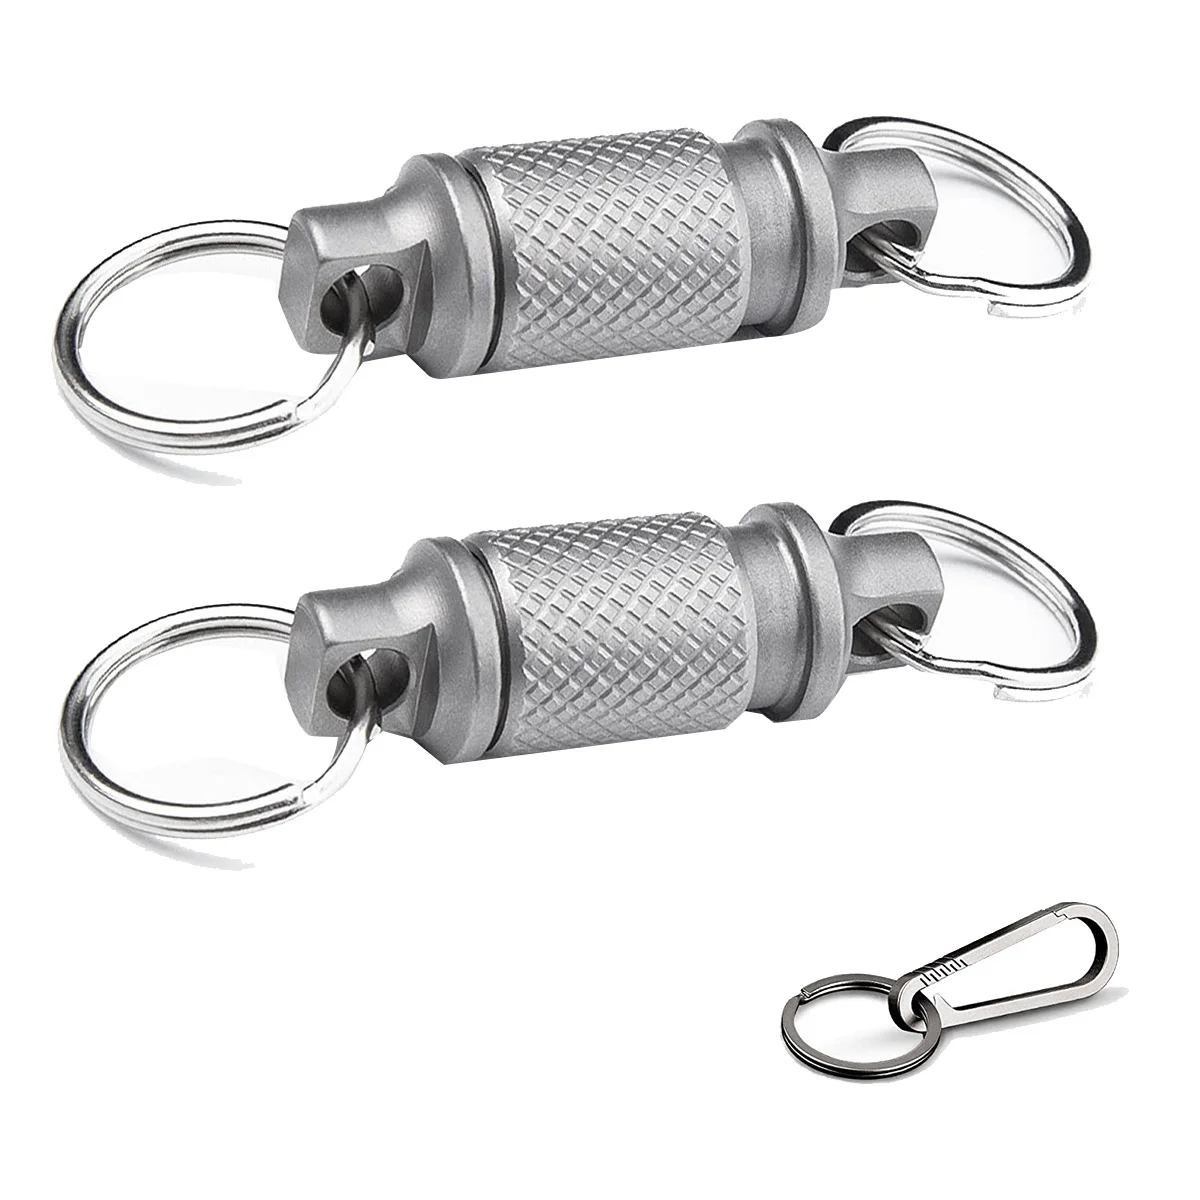 

Quick Release Keychain Set with Titanium Carabiner and Keyrings - Advanced Titanium Swivel Clip 360-Degree Rotation